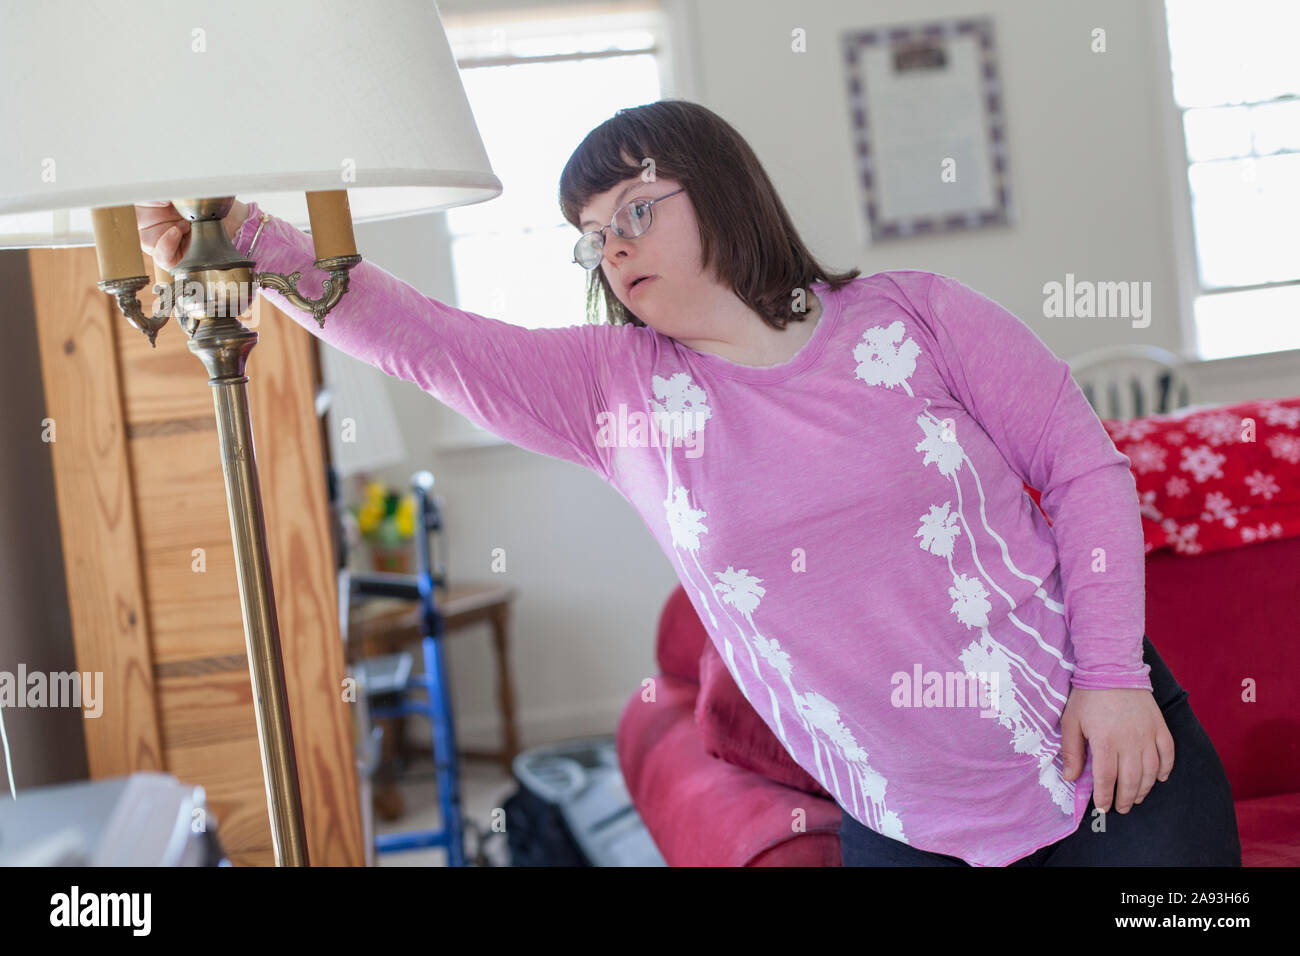 Girl with Down Syndrome turning on the light in her living room Stock Photo